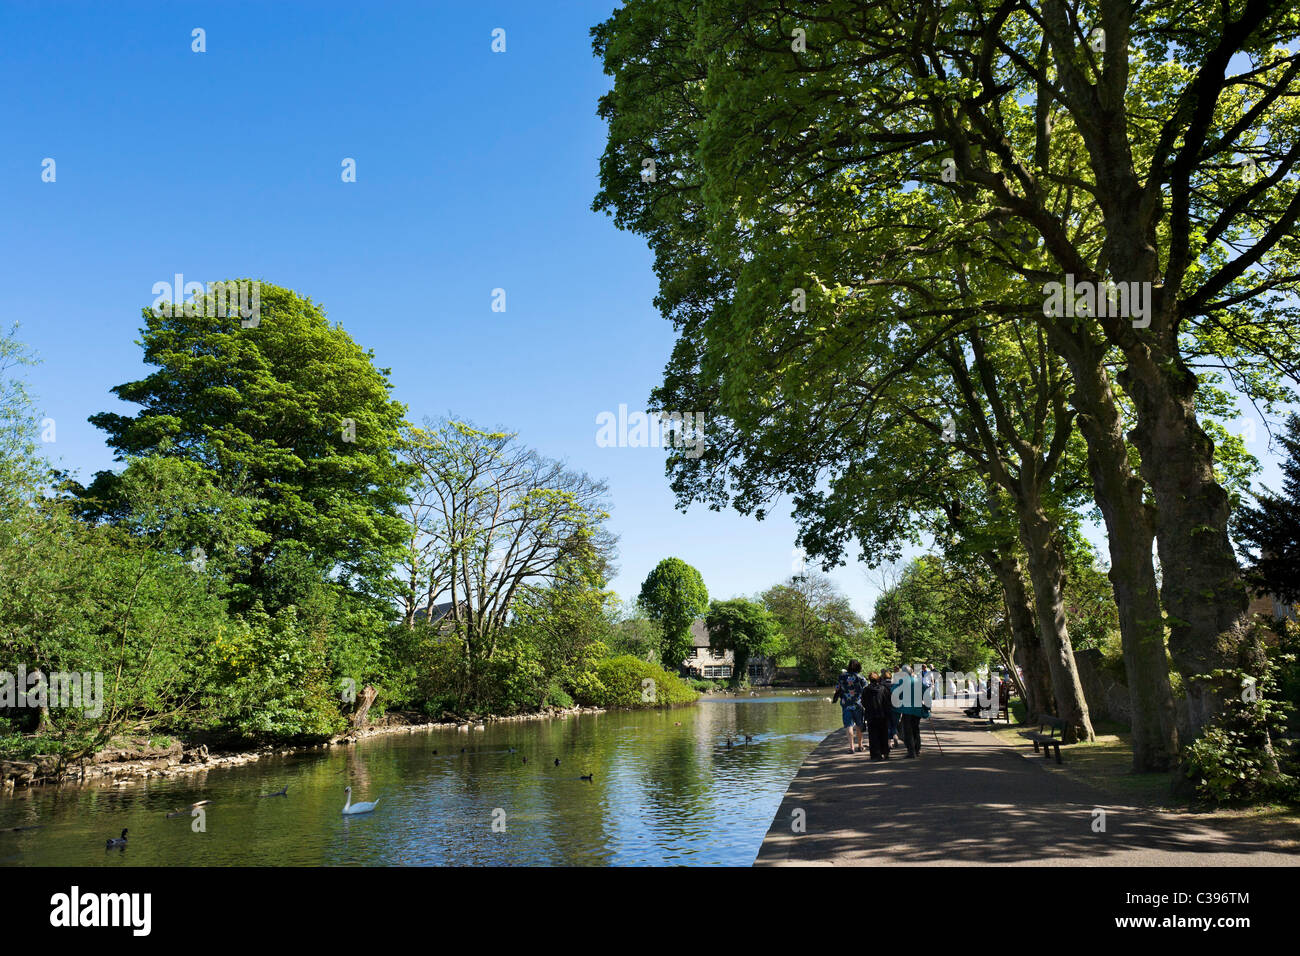 The banks of the River Wye in the village of Bakewell on early May Bank Holiday weekend, The Peak District, Derbyshire, UK Stock Photo